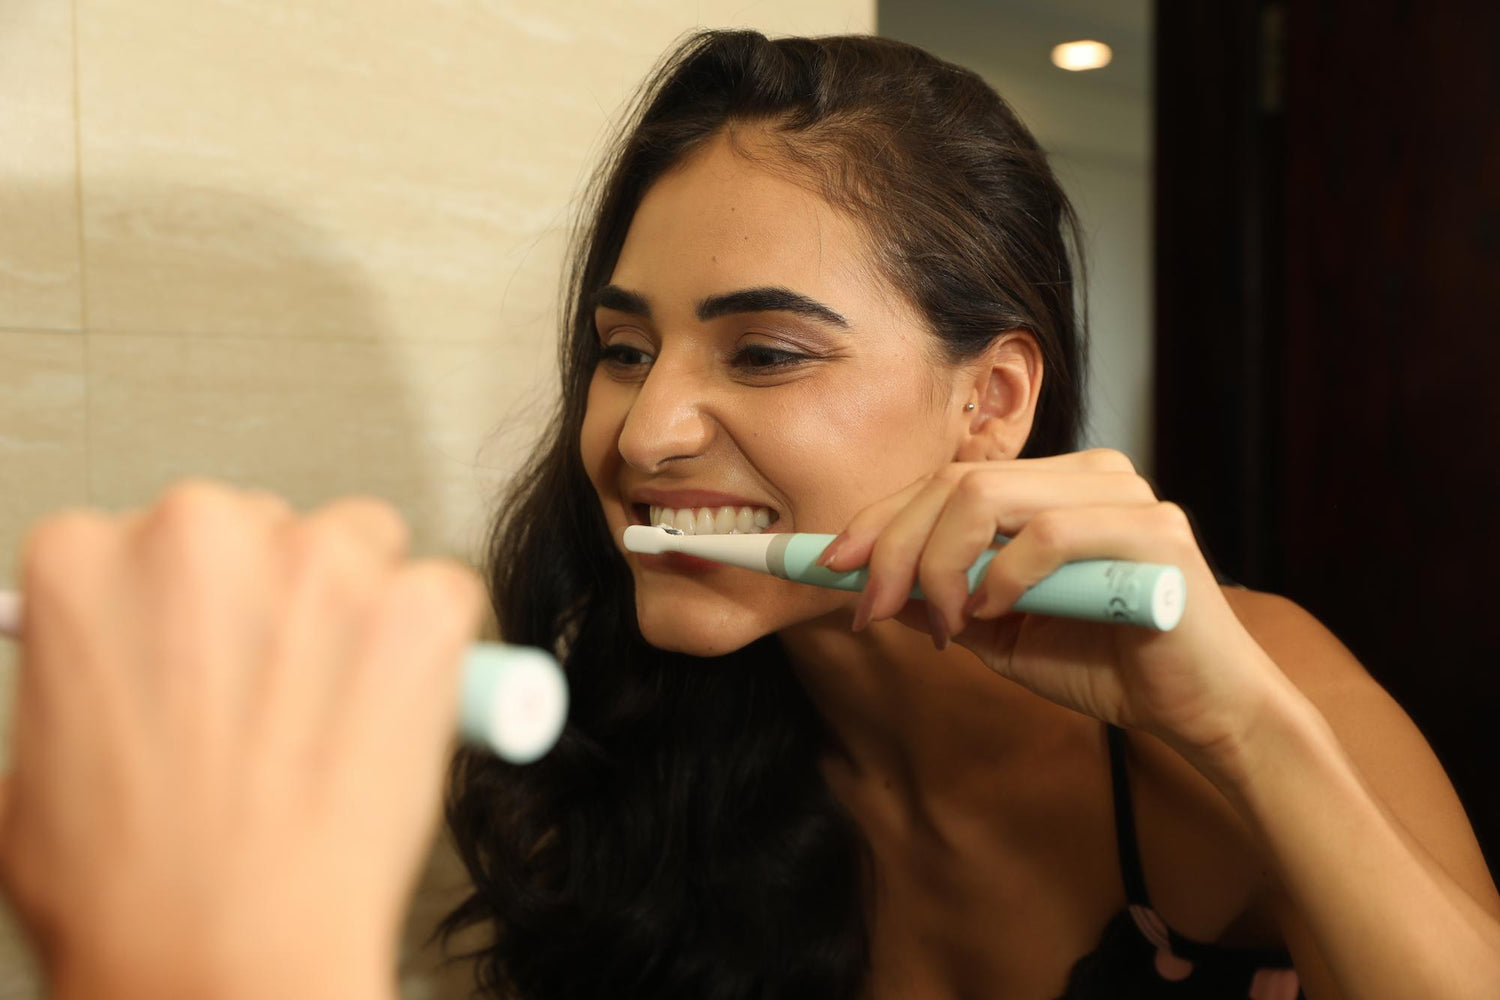 We at TÜSK believe oral hygiene is essential to a healthy body. Our products aim to foster stronger teeth and brighter smiles. Just as we are diligent in taking care of our teeth, we are also devoted to providing the best service possible.